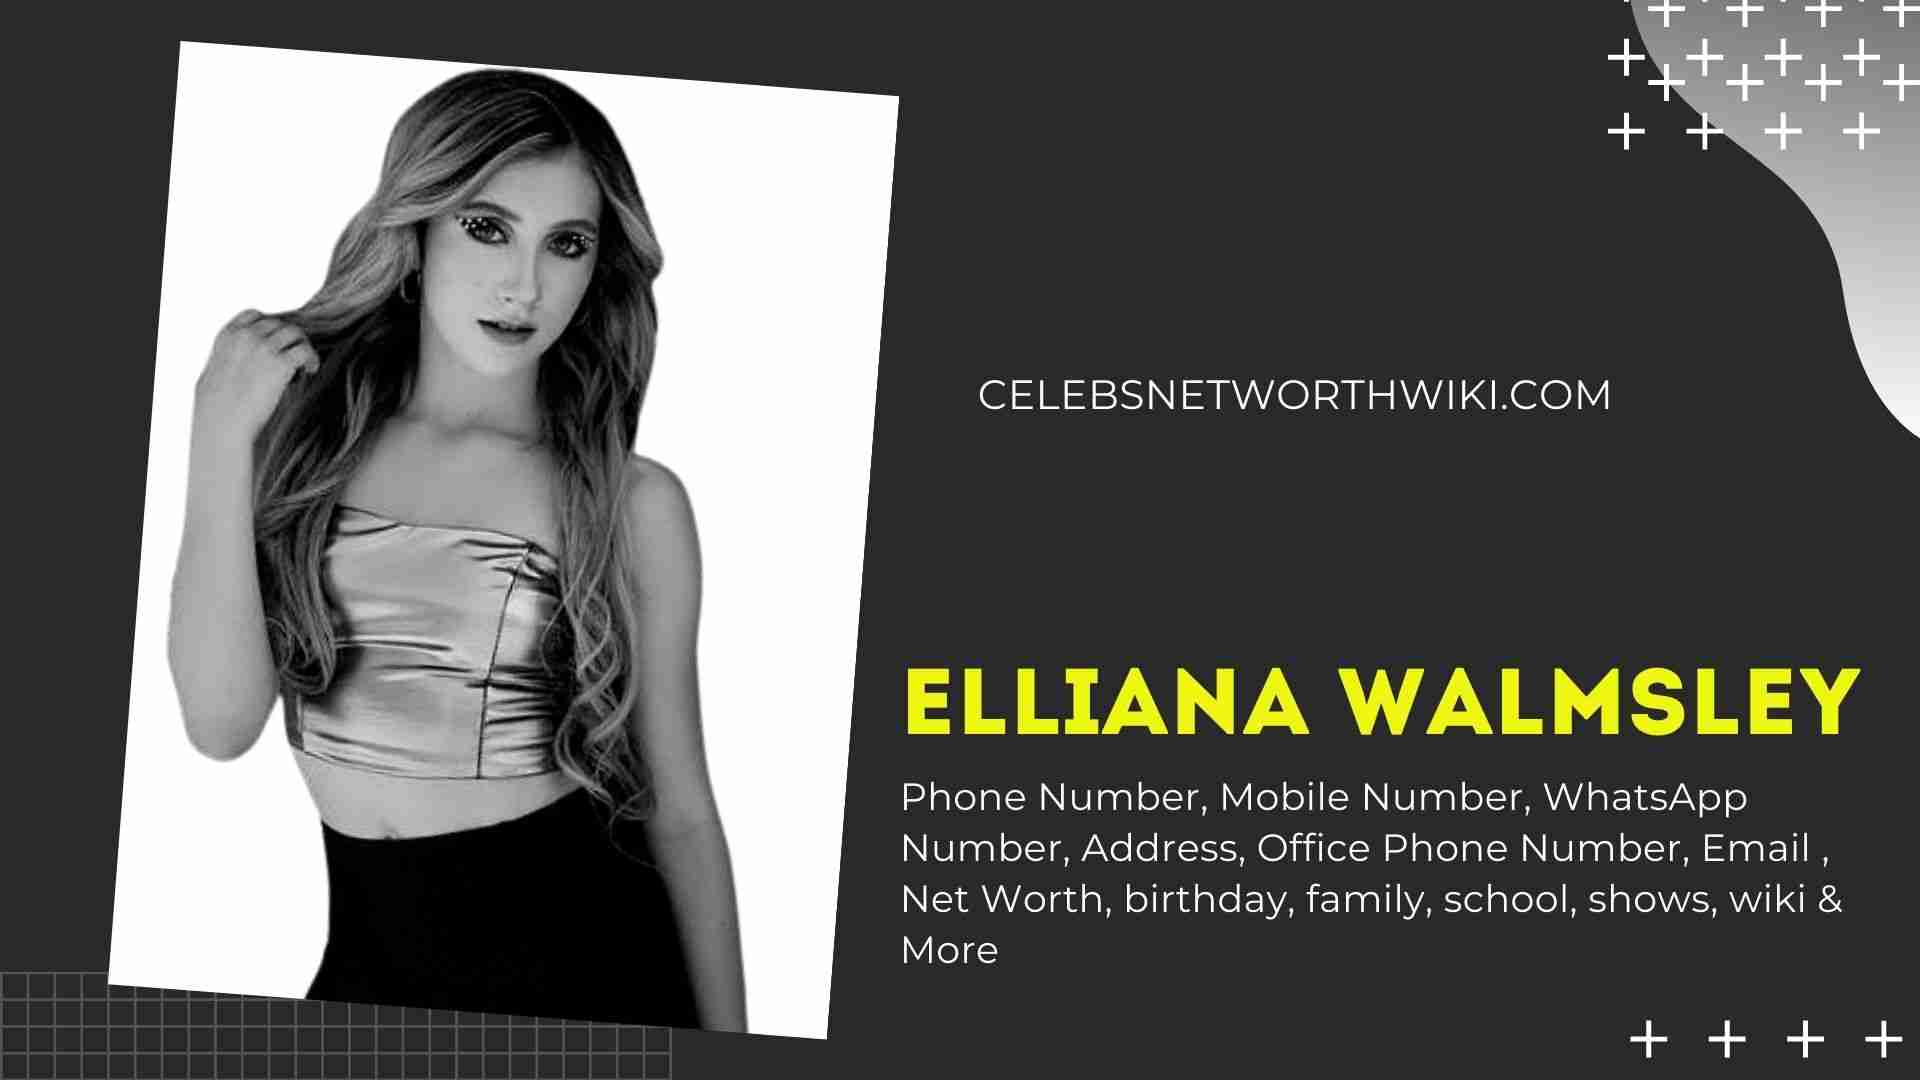 Elliana Walmsley Phone Number Texting Number Contact number Mobile.